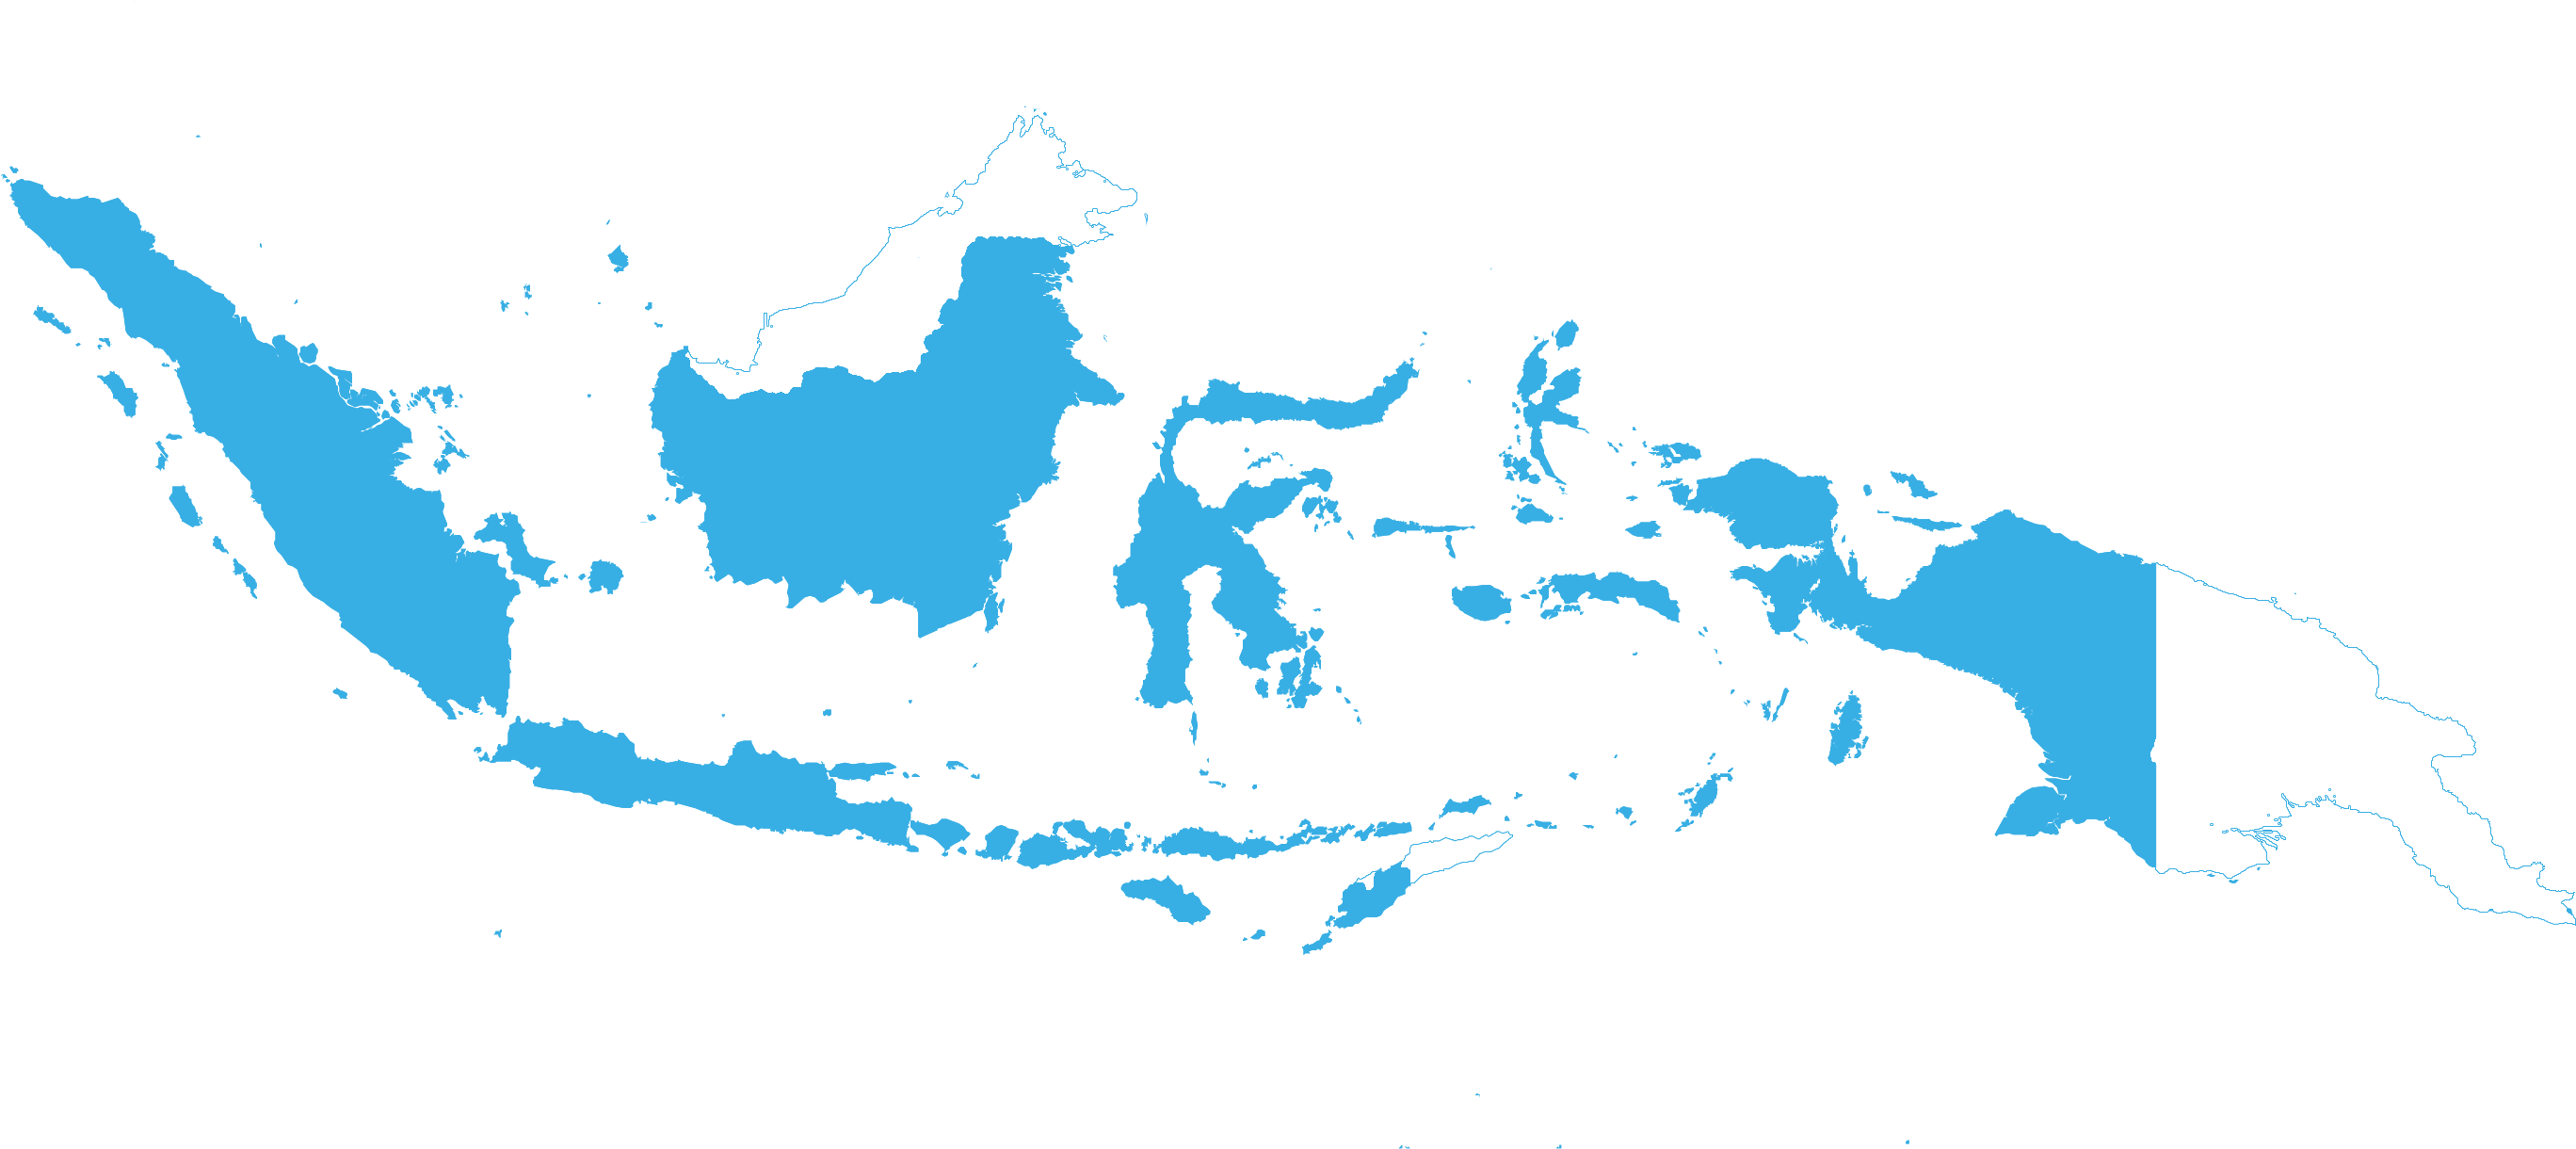 Download Peta Indonesia Png Indonesia Map Hd Transparent Png Images